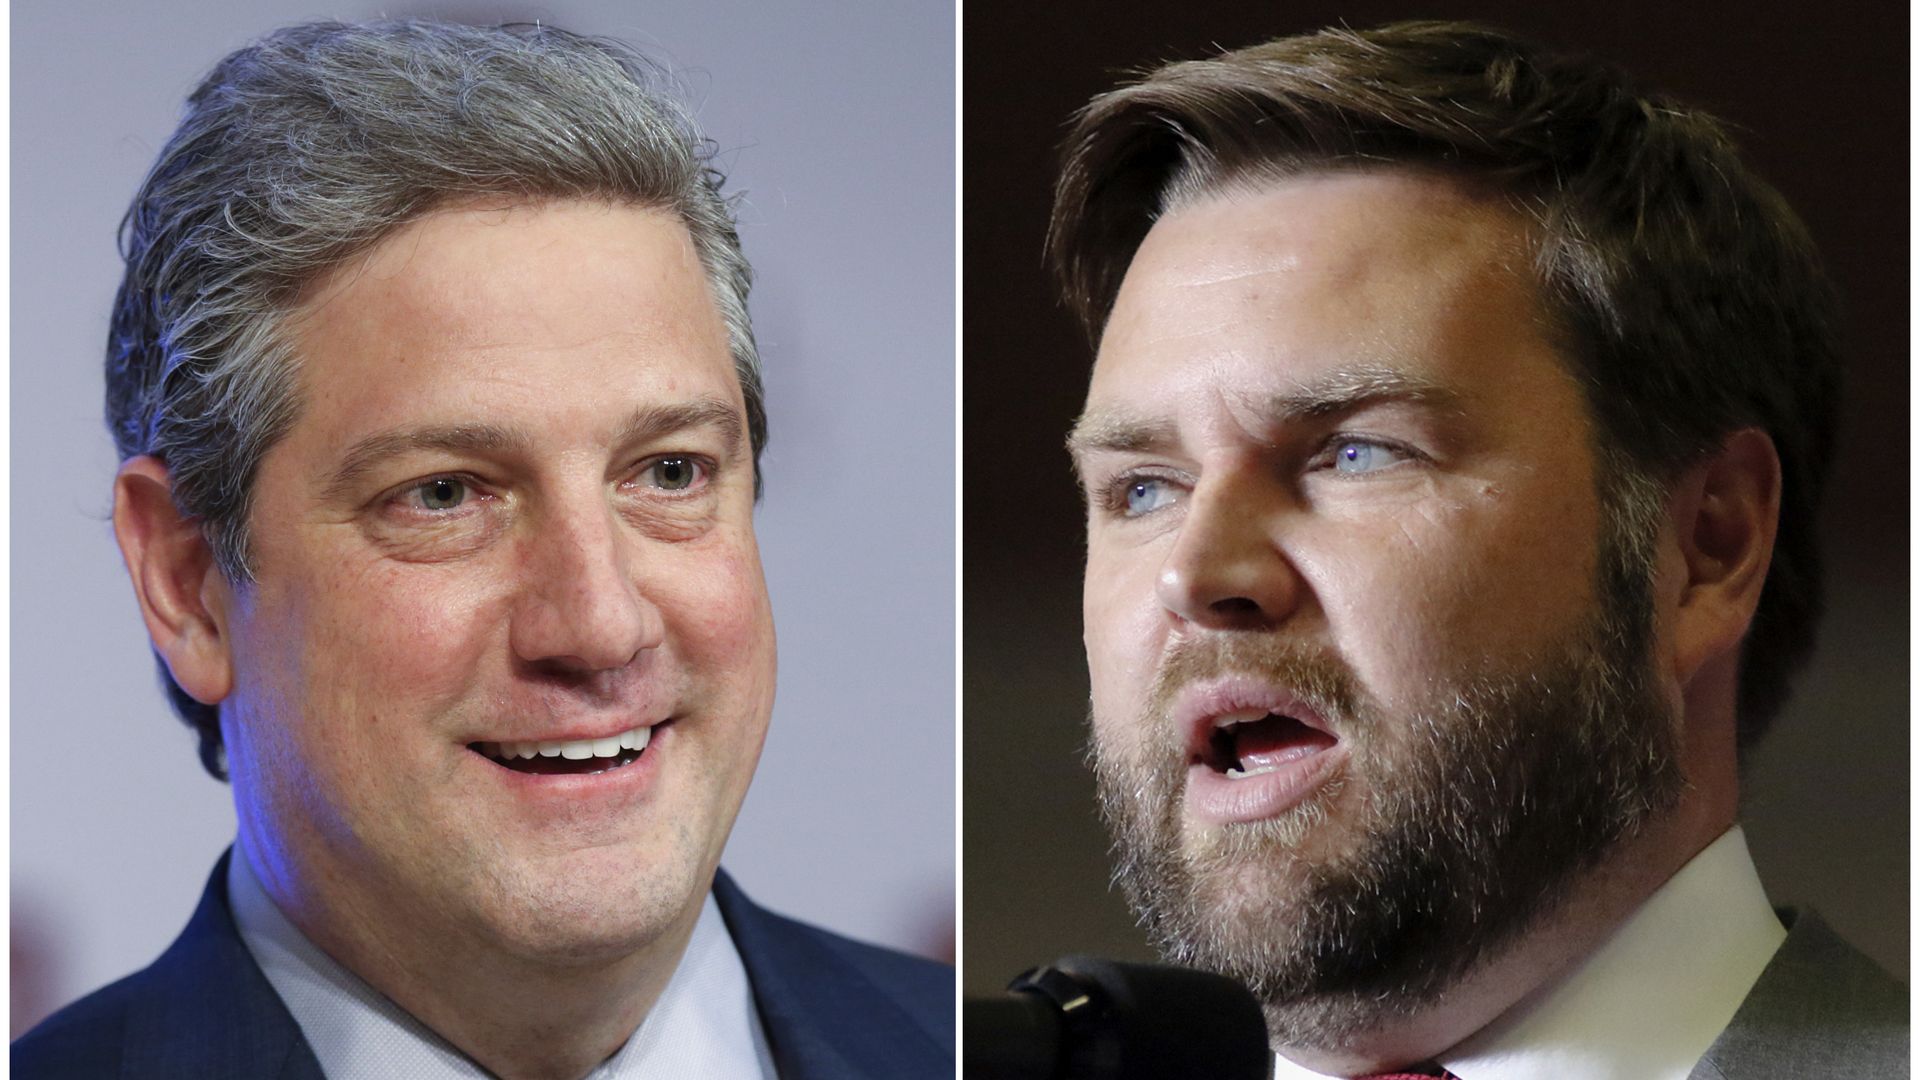 Side-by-side photos of Ohio Senate candidates Rep. Tim Ryan and J.D. Vance.